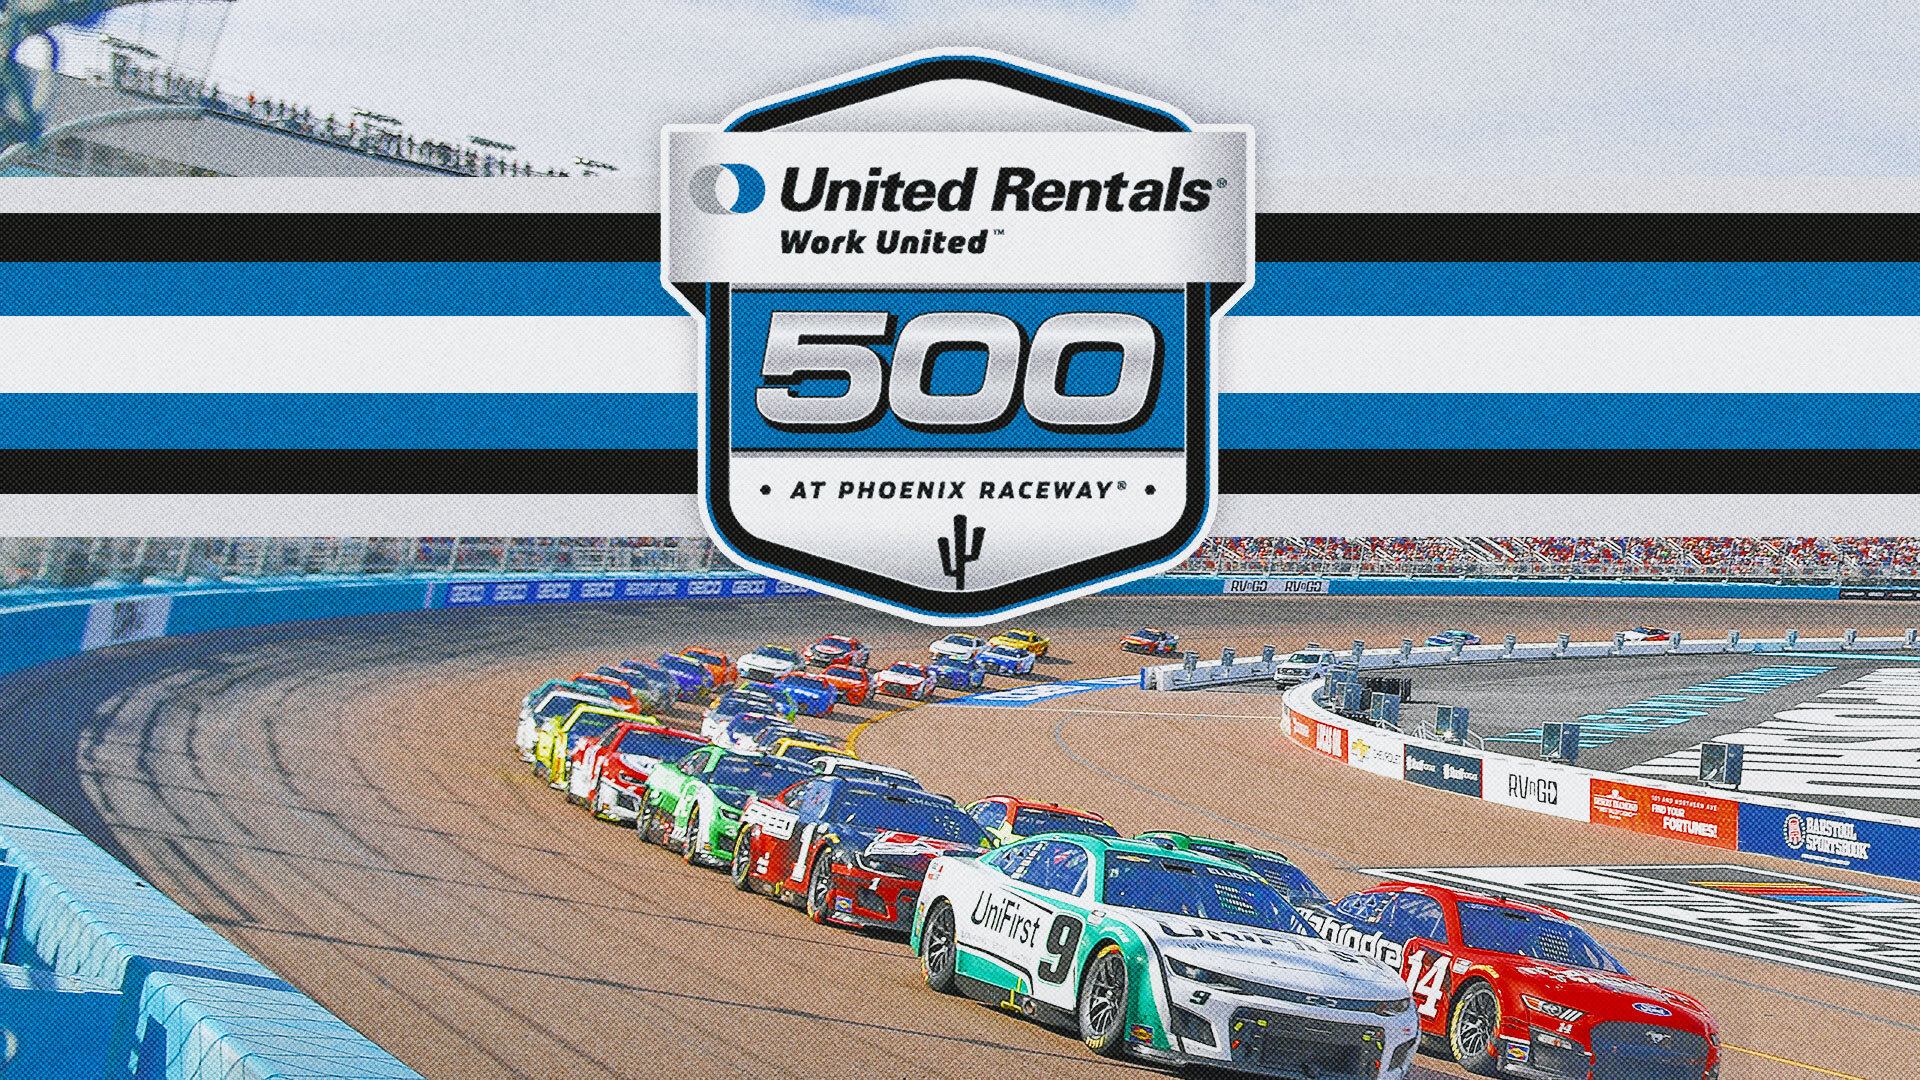 United Rentals Work United 500 highlights: Top moments from Phoenix